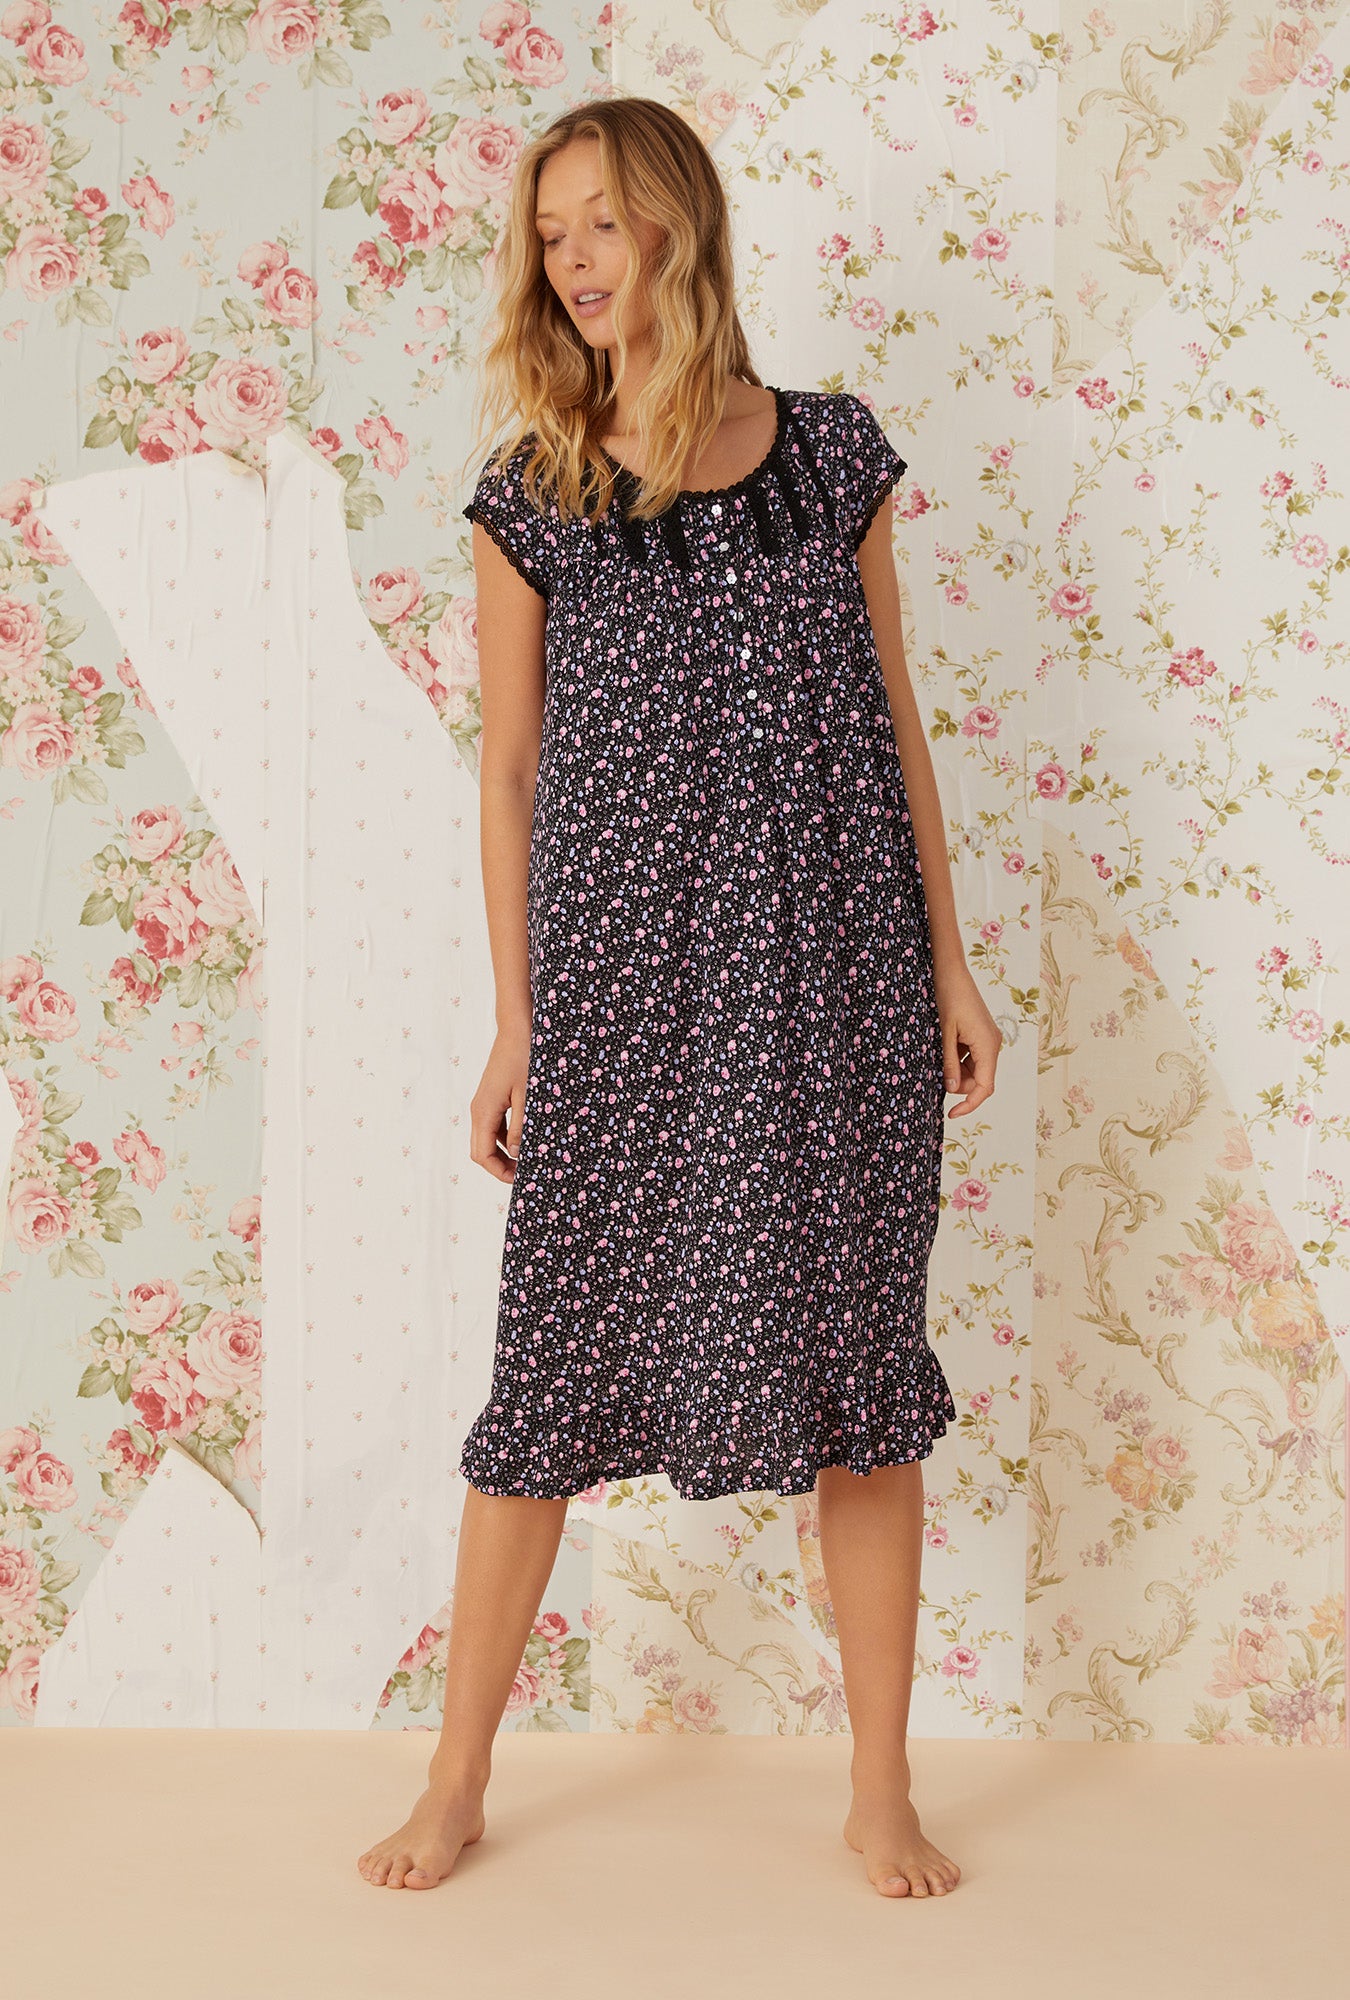 A lady wearing black cap sleeve cotton modal waltz knit nightgown with night blooms print.